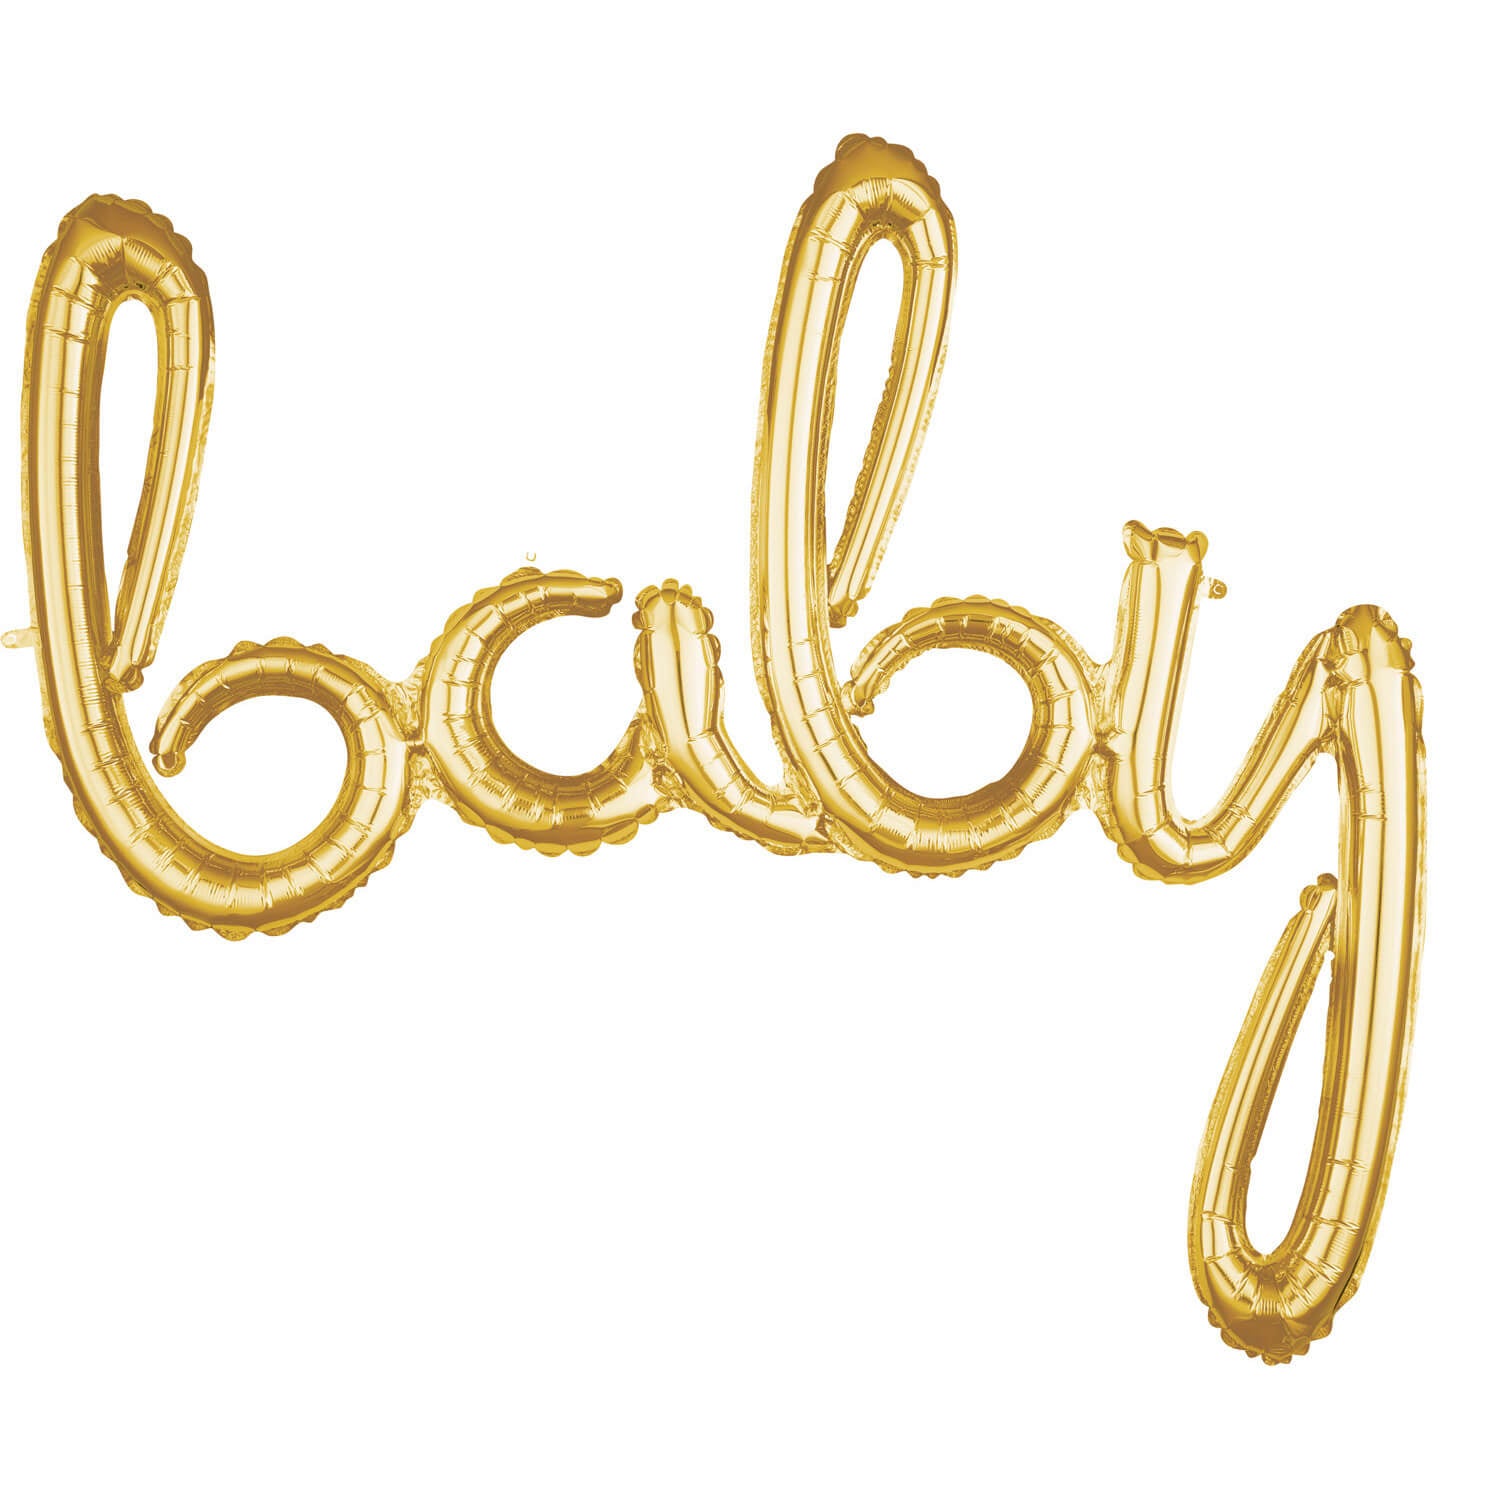 Golden handwriting baby inflatable with suction